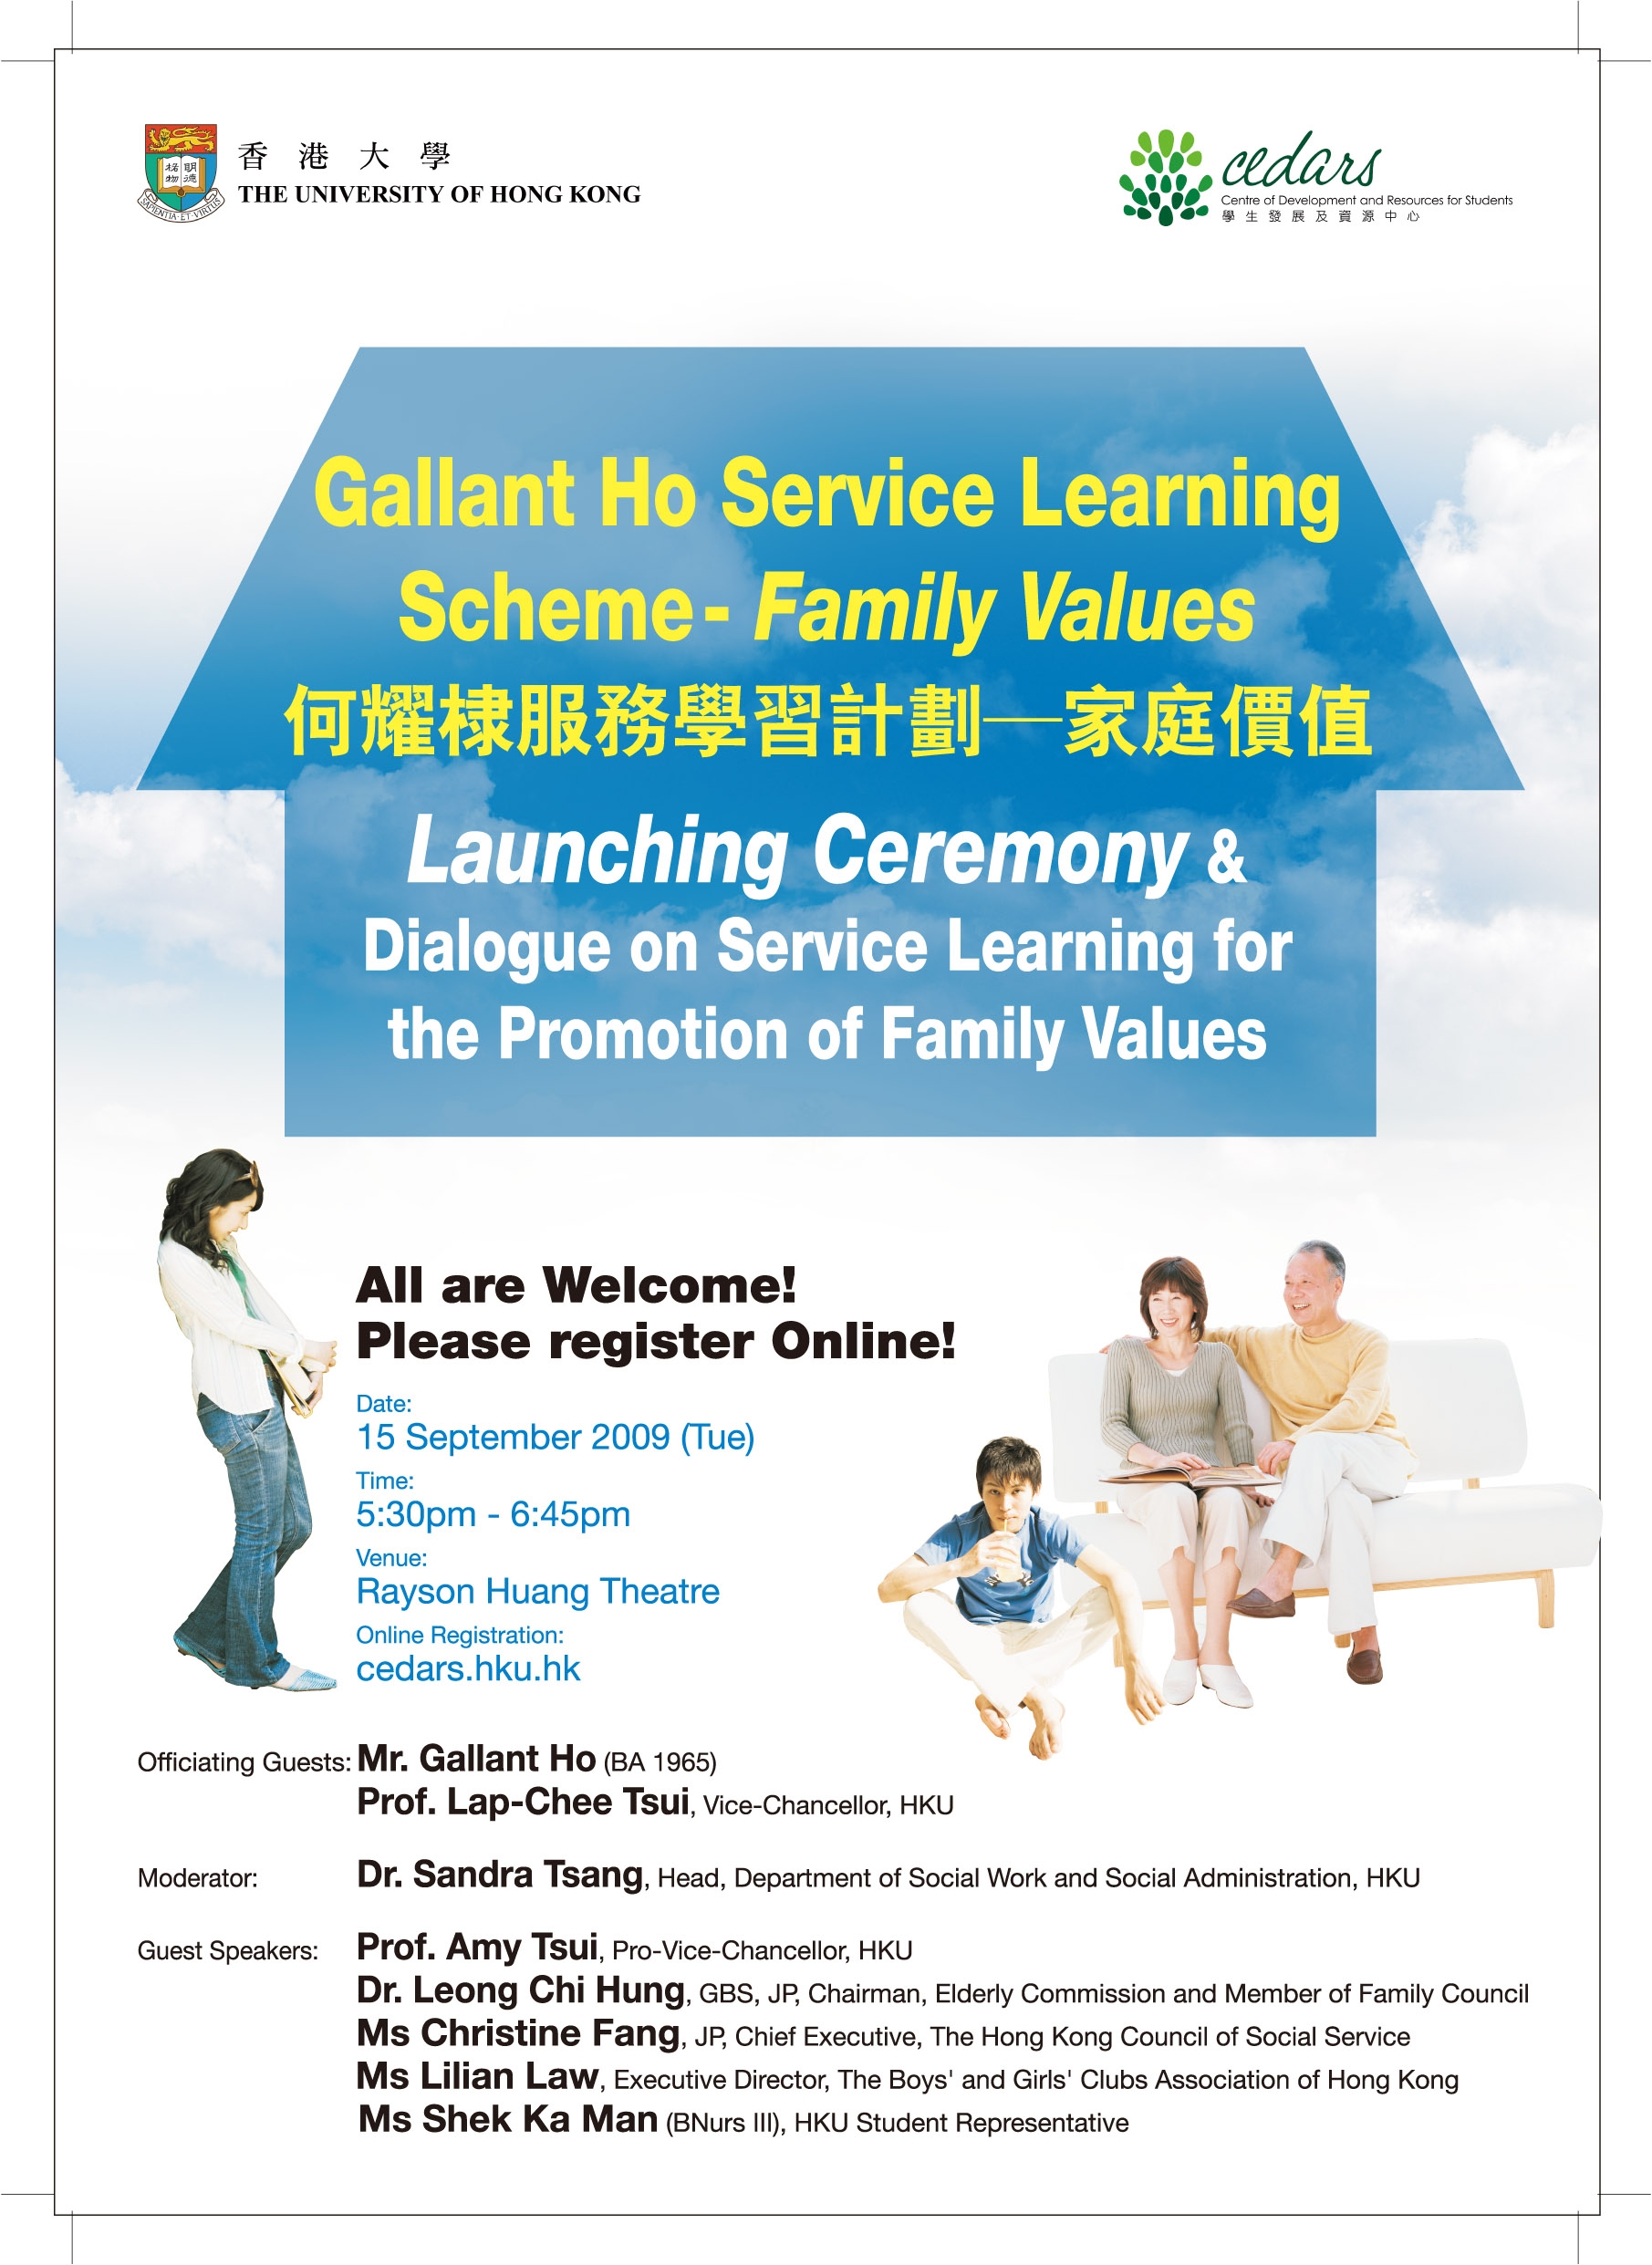 Gallant Ho Service Learning Scheme and Dialogue on Service Learning